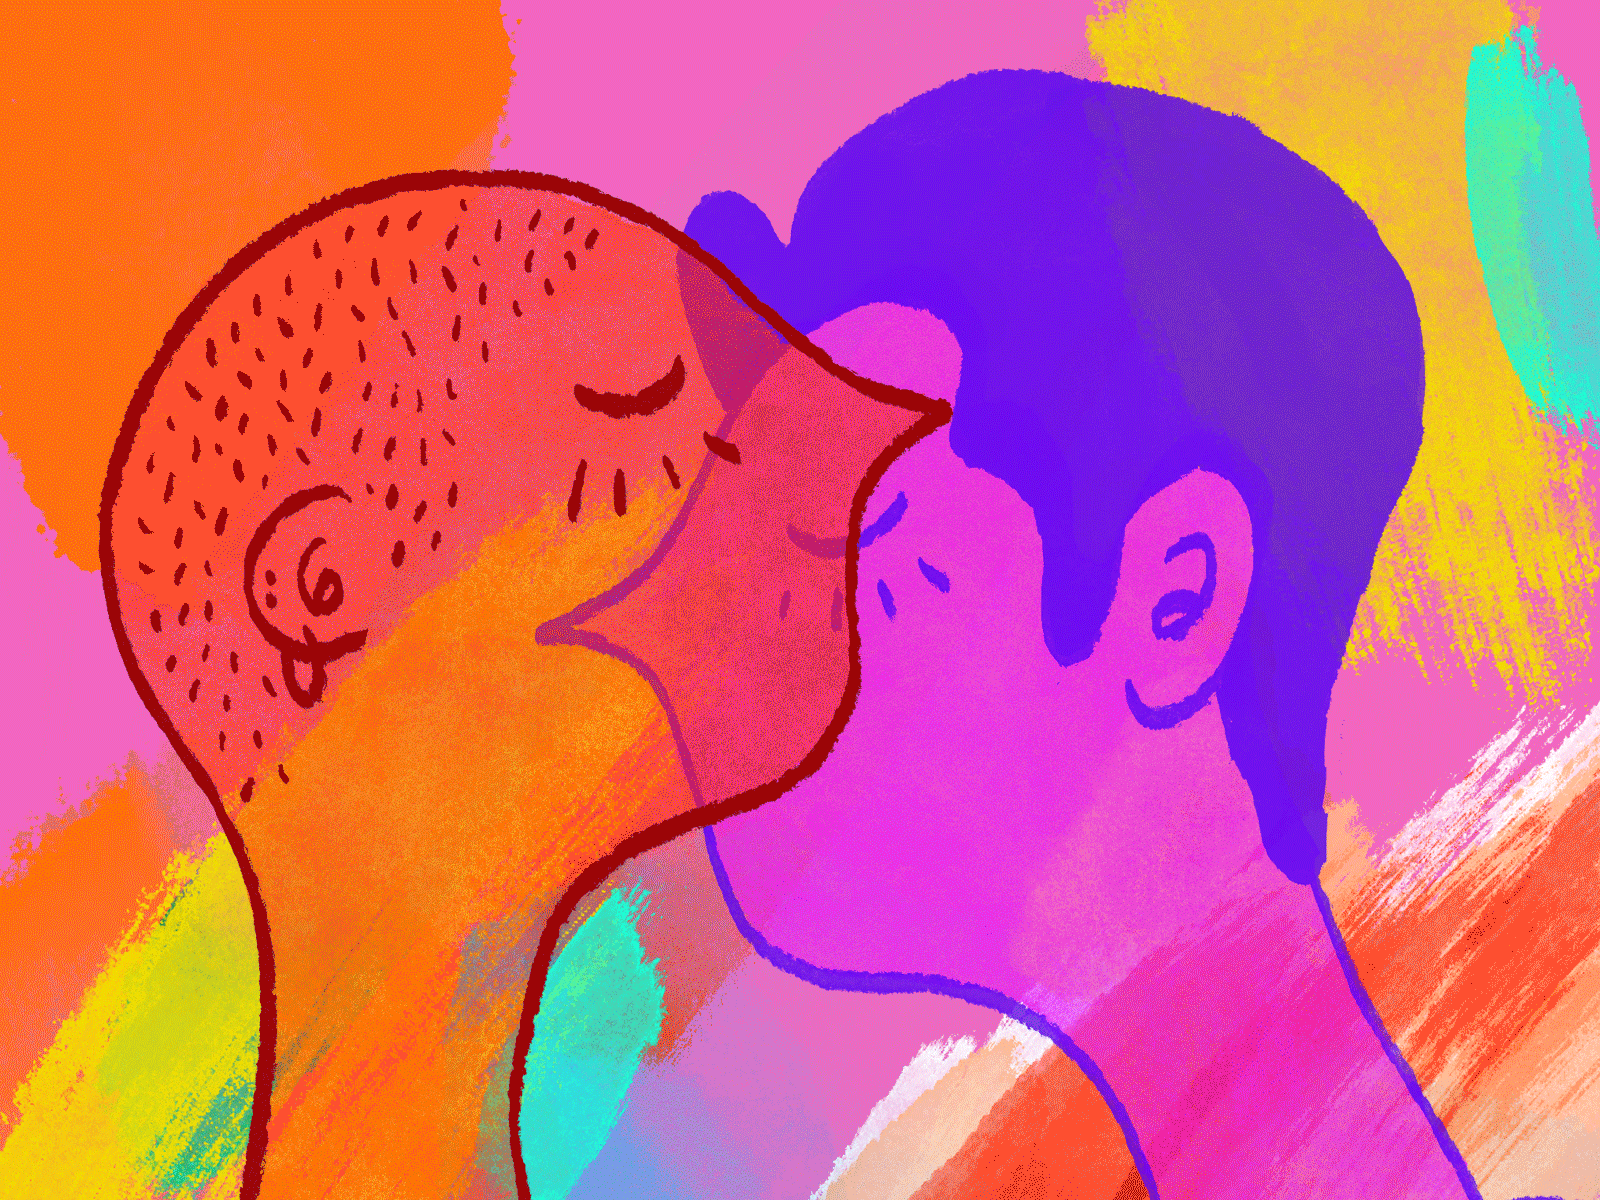 When we last touched animation blue character couple couple illustration illustration kiss man pink portrait touch woman yellow